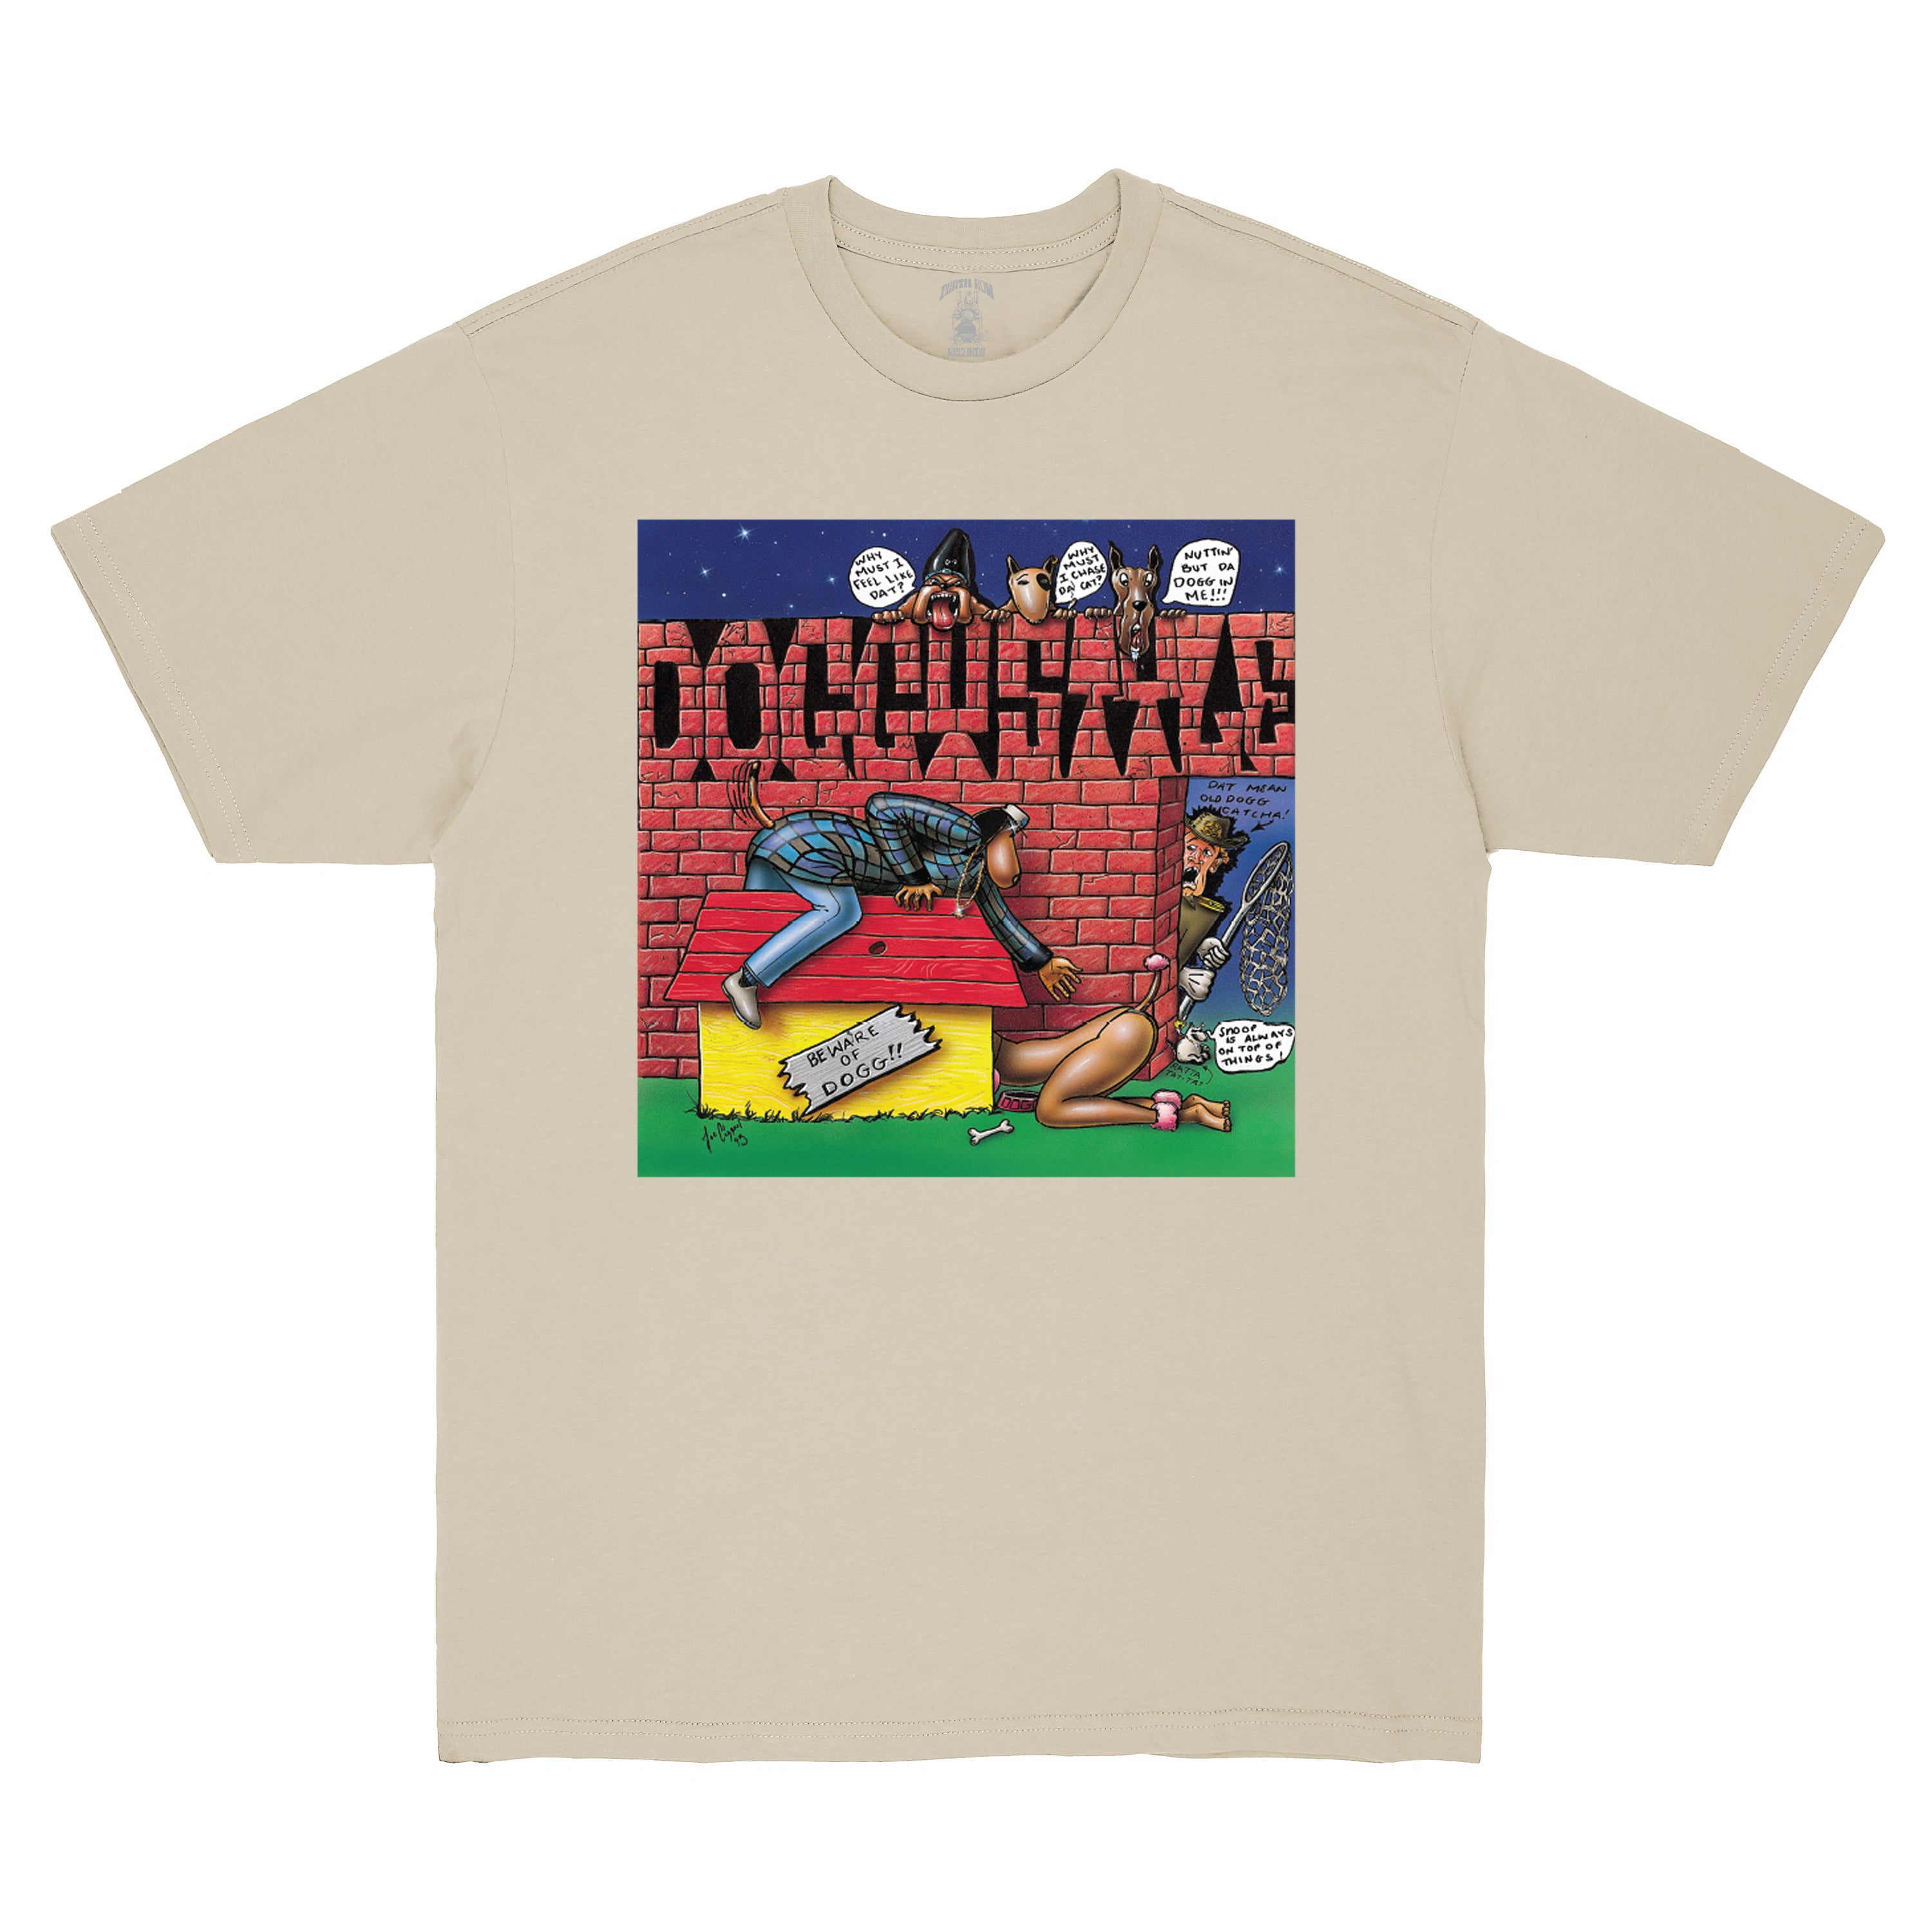 Doggystyle 30 Year Anniversary Album Cover Tee